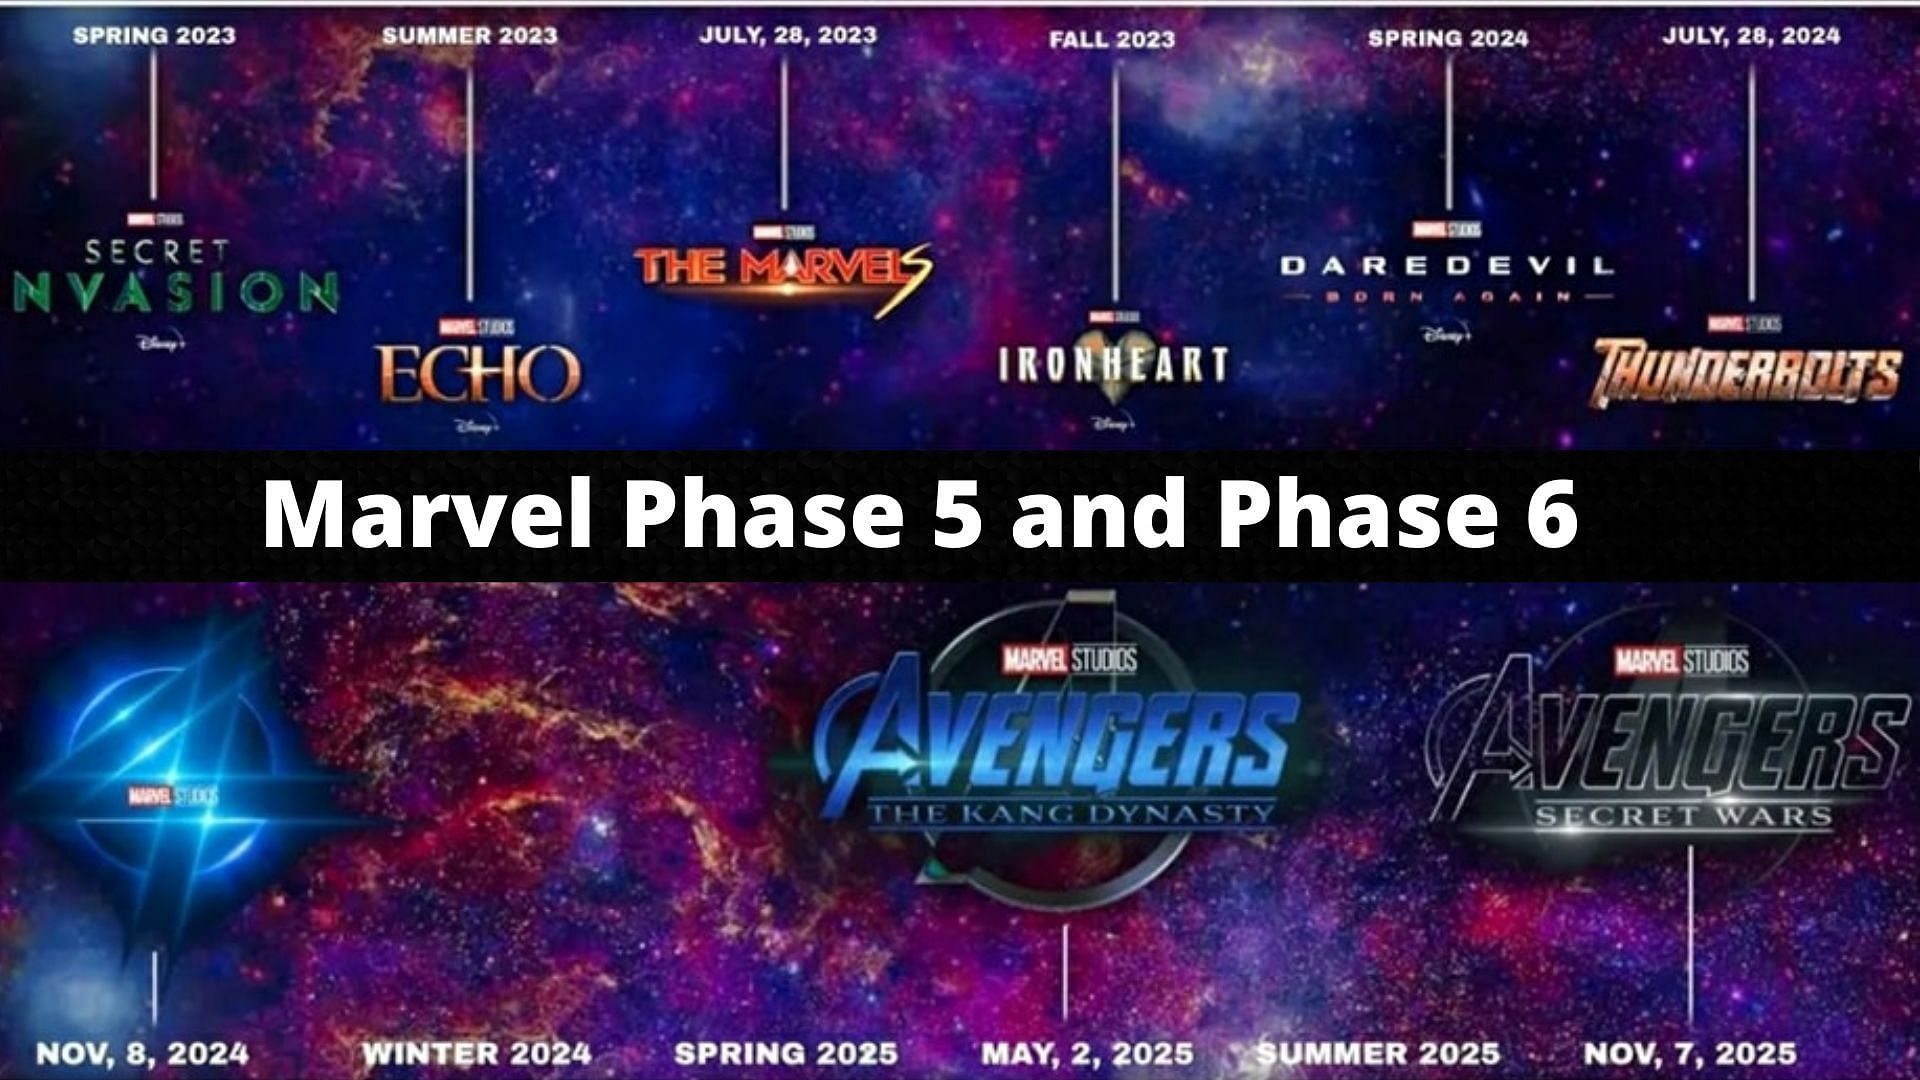 All Marvel Movies Releasing In 2024